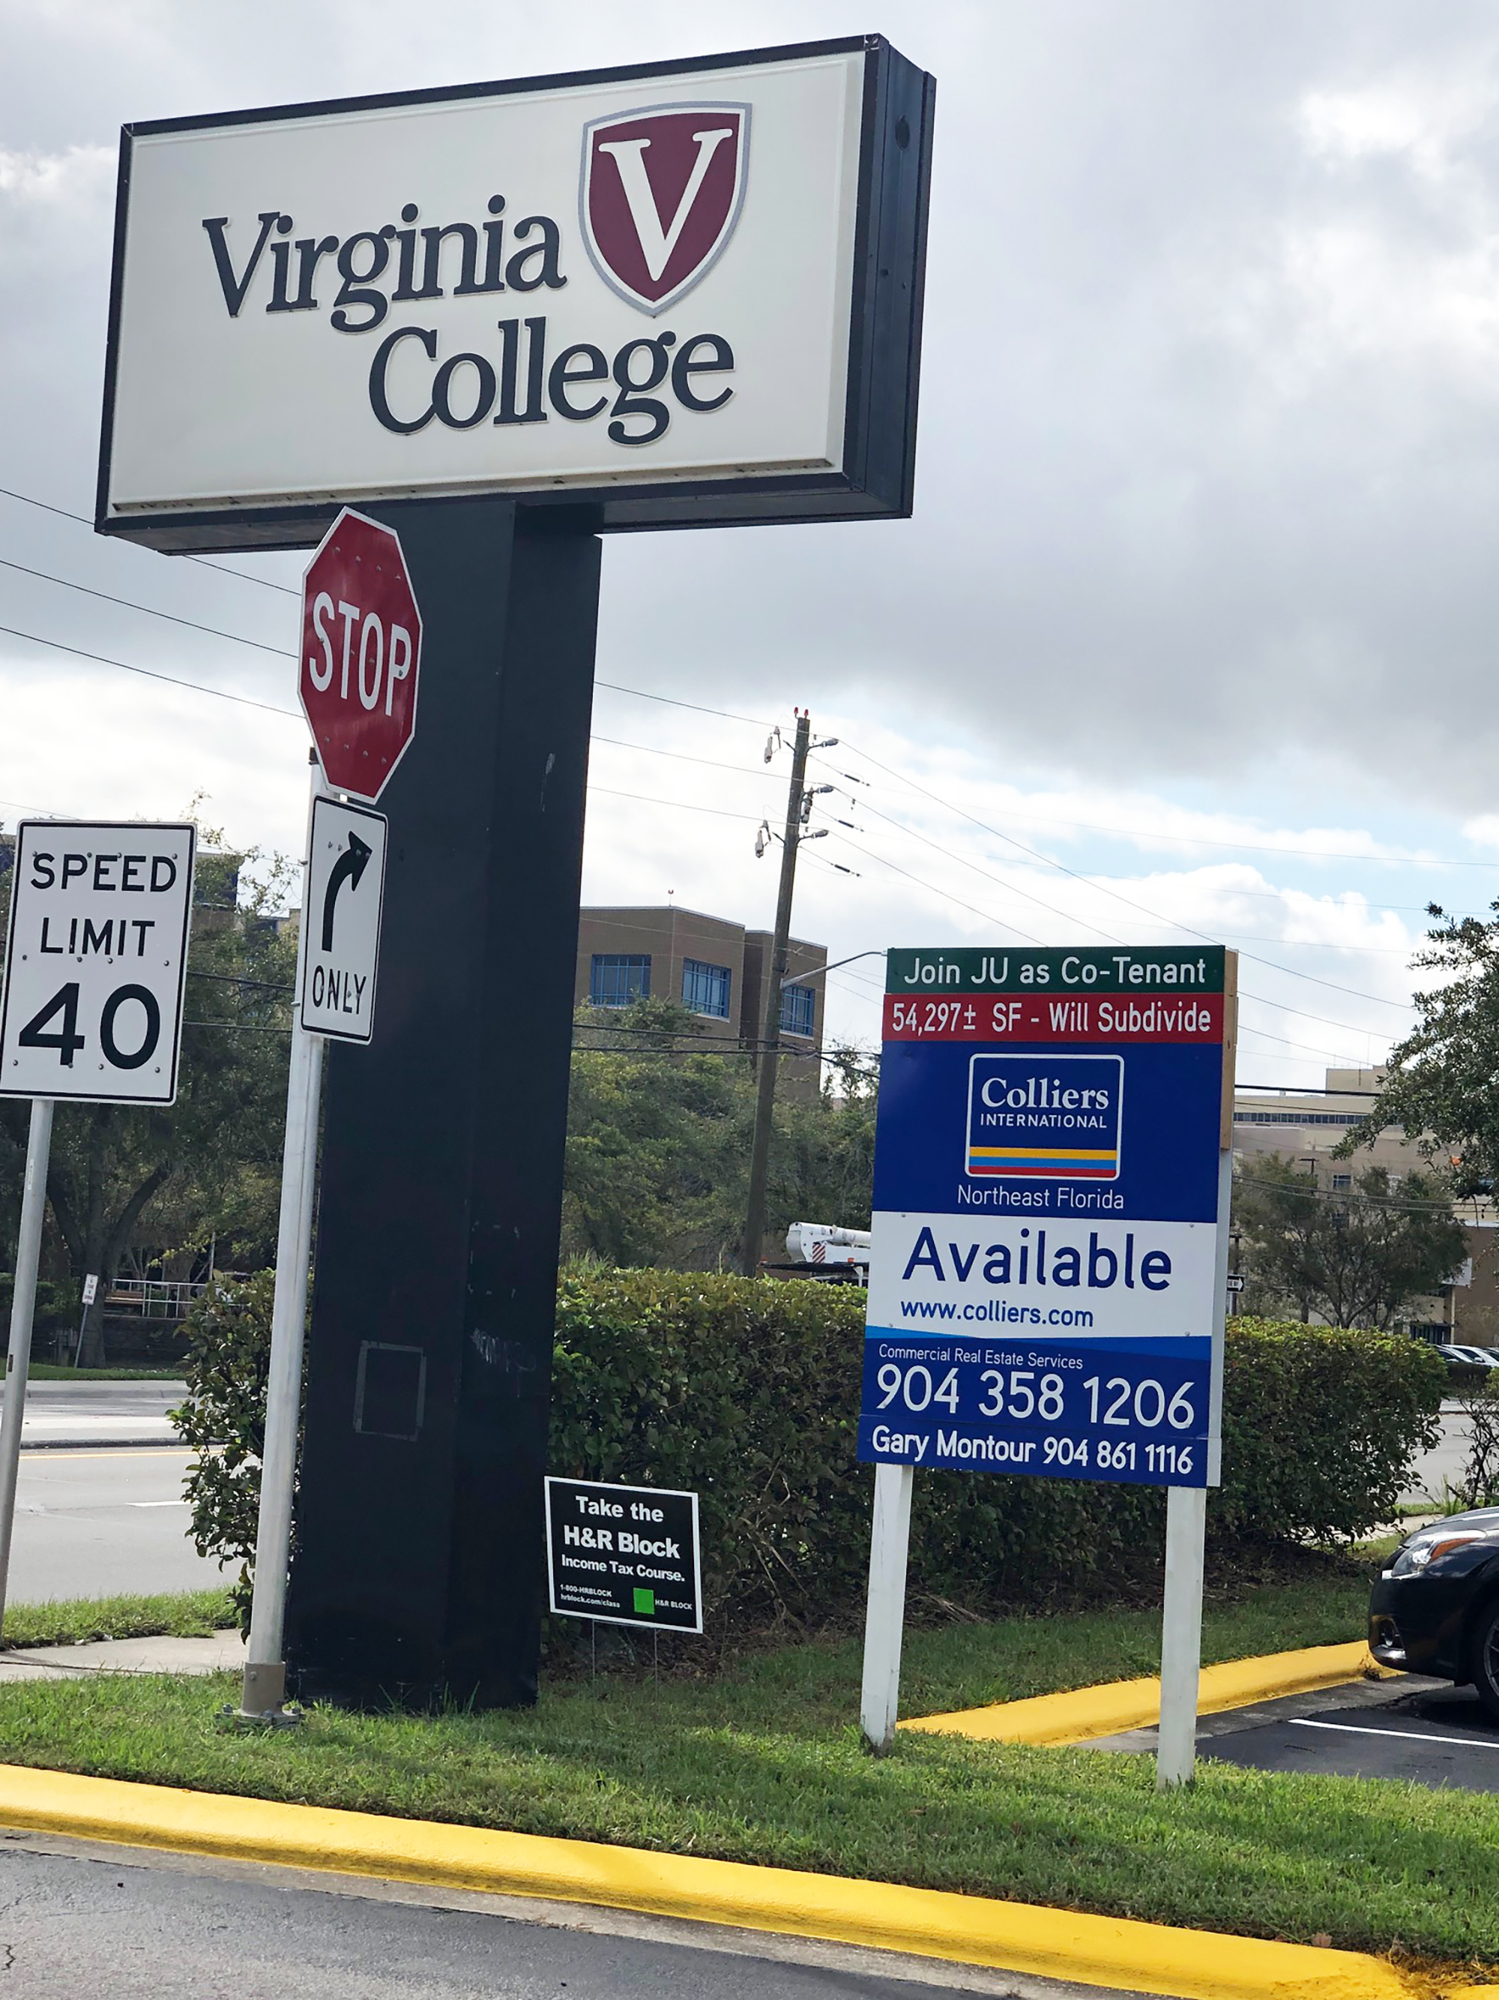 Virginia College closed in December after its parent, Birmingham, Alabama-based Education Corporation of America, went out of business.